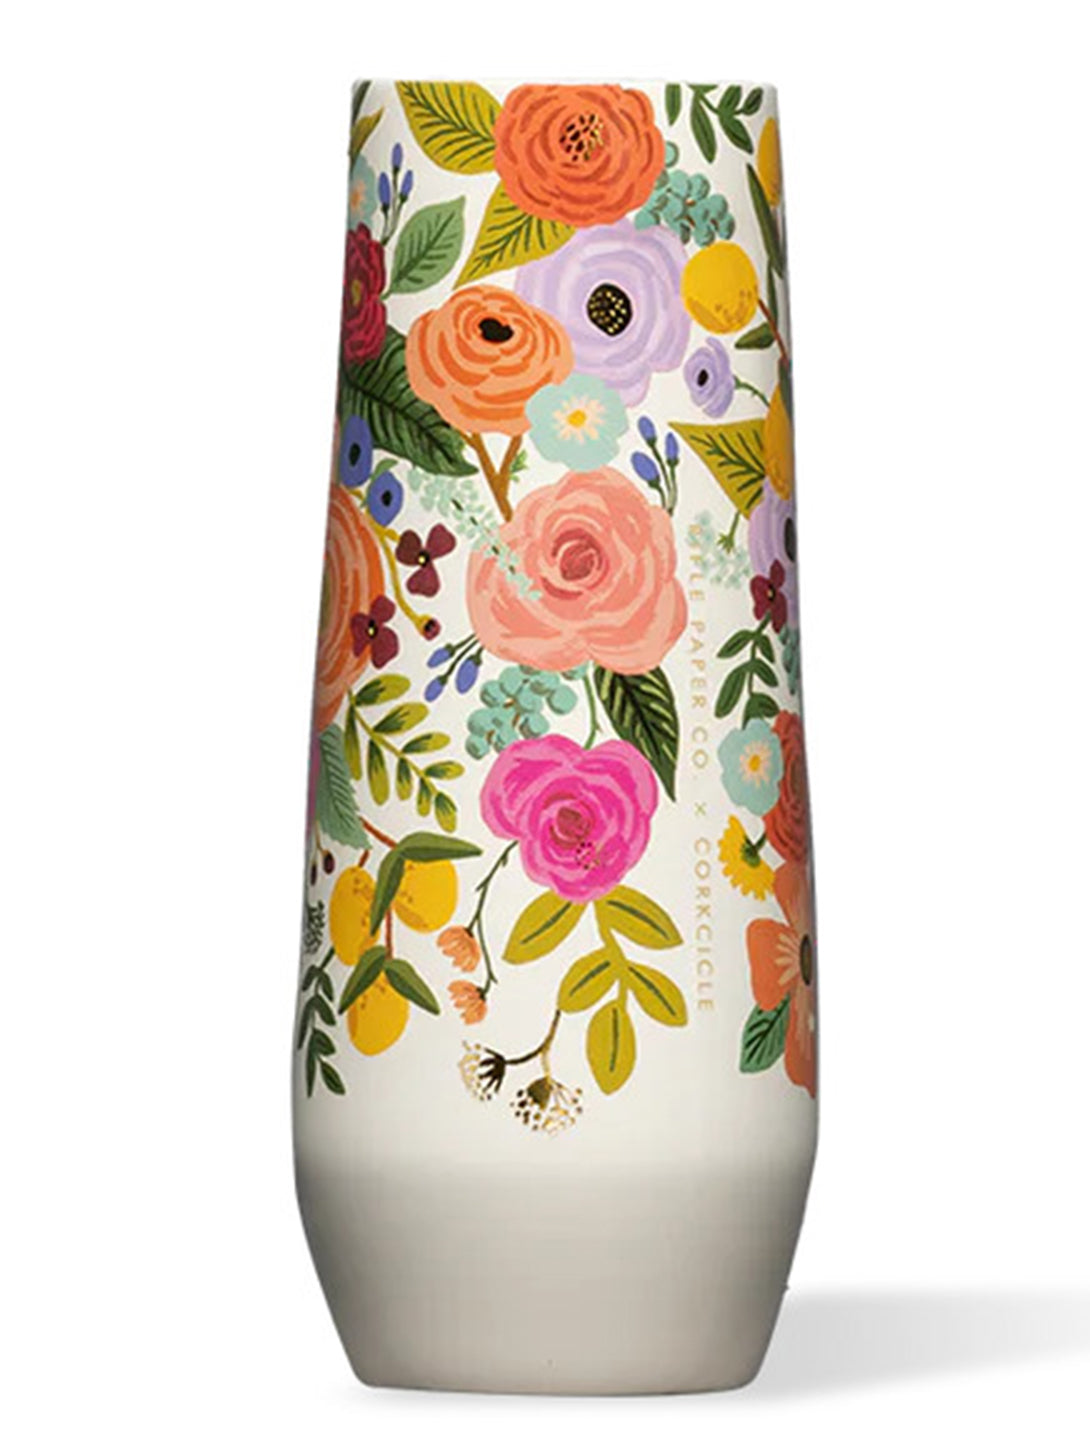 https://www.shoprainbowjeans.shop/wp-content/uploads/1692/80/find-great-bargains-on-rifle-paper-co-stemless-flute-7oz-garden-party-cream-corkcicle-in-our-online-store-today_0.jpg